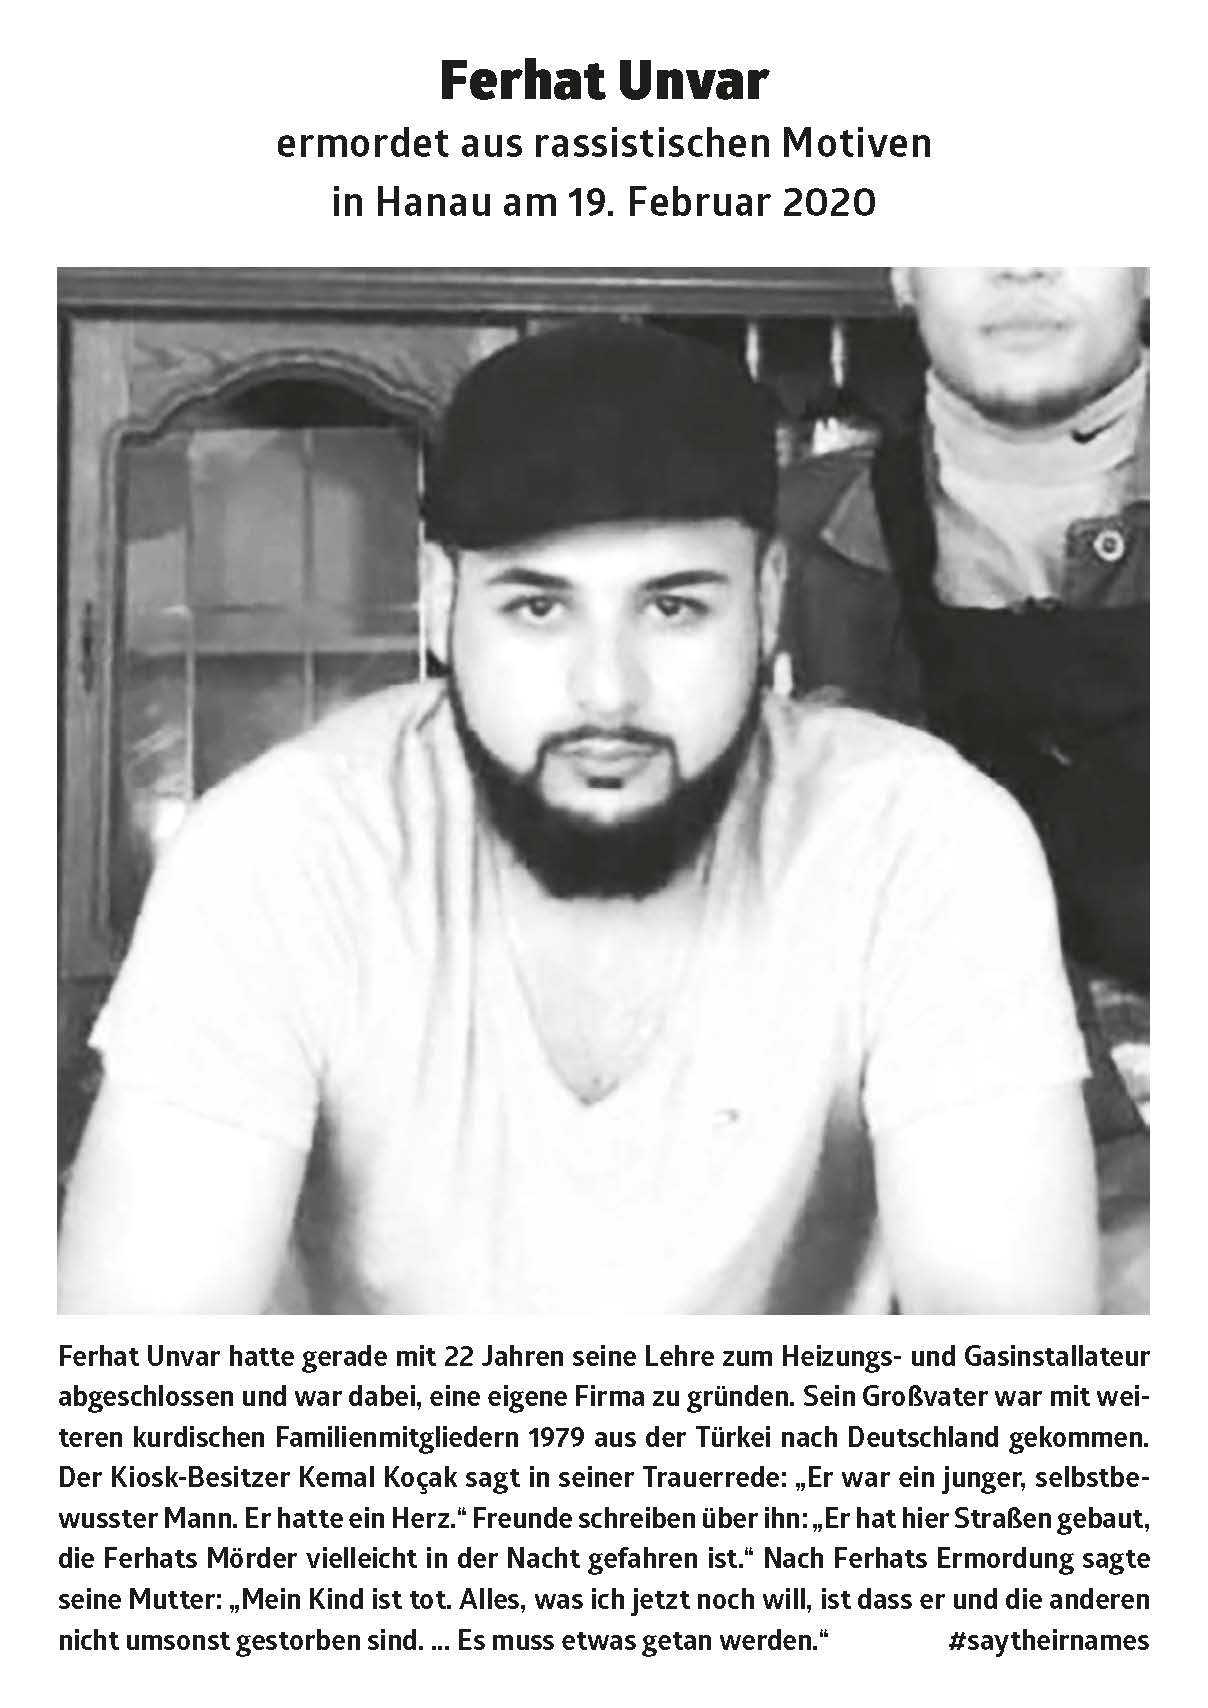 Ferhat Unvar had just completed his apprenticeship as a heating and gas installer at the age of 22 and was about to found his own company. His grandfather came to Germany from Turkey with other Kurdish family members in 1979. The kiosk owner Kemal Koçak says in his funeral speech: “He was a young, confident man. He had a heart. "Friends write about him:" He built roads here that Ferhat's murderer might have driven at night. "After Ferhat's murder, his mother said:" My child is dead. All I want now is is that he and the others didn't die for nothing. ... something has to be done. "